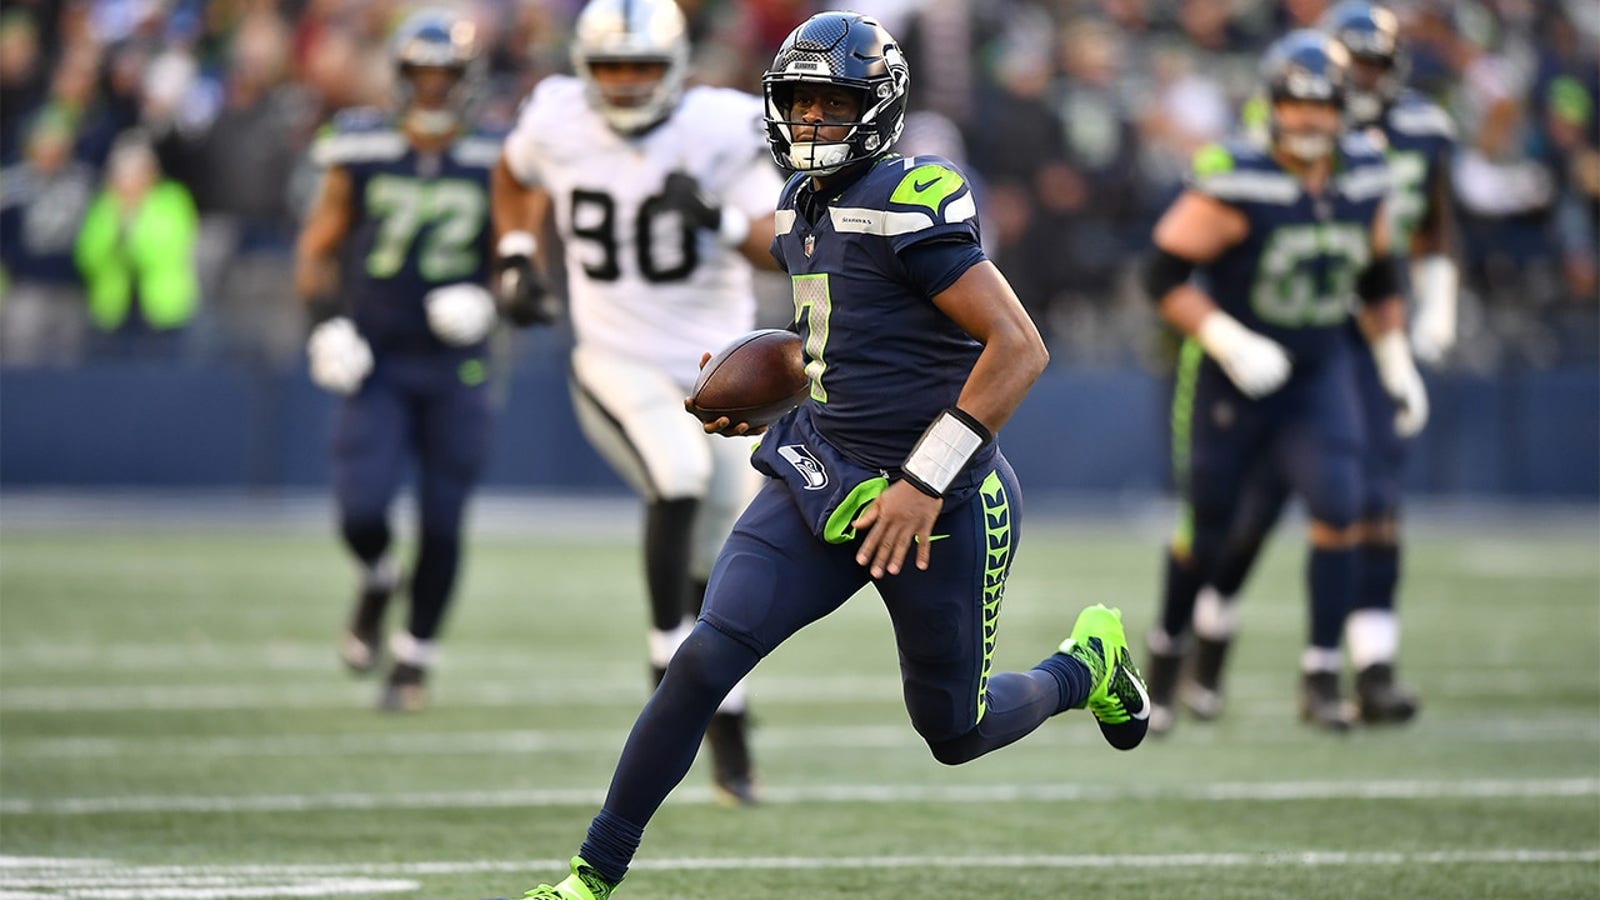 NFL Week 13: Will Geno Smith and the Seahawks handle the Rams?